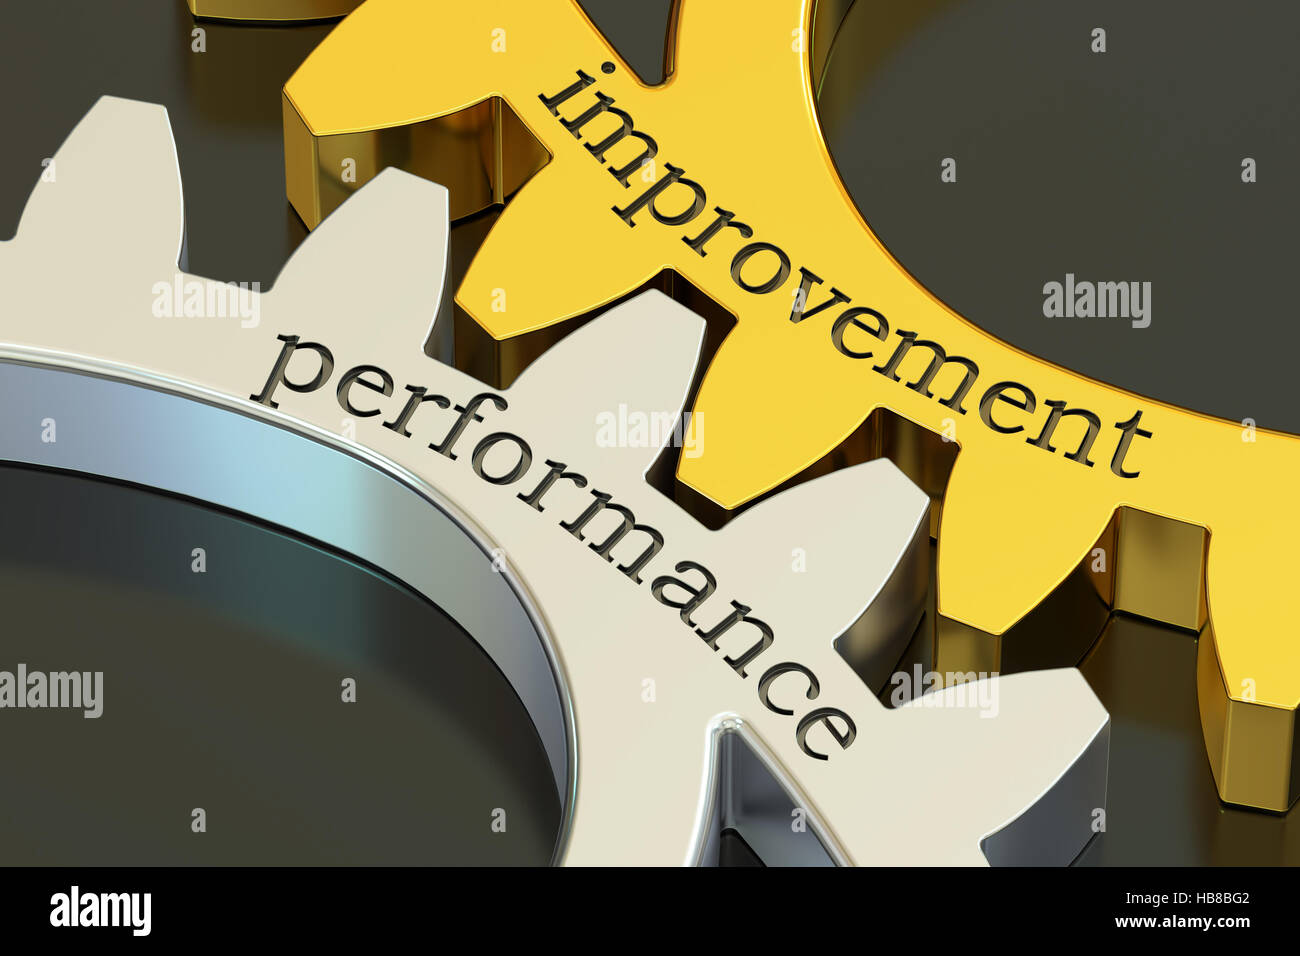 Improvement Performance concept on the gearwheels, 3D rendering Stock Photo